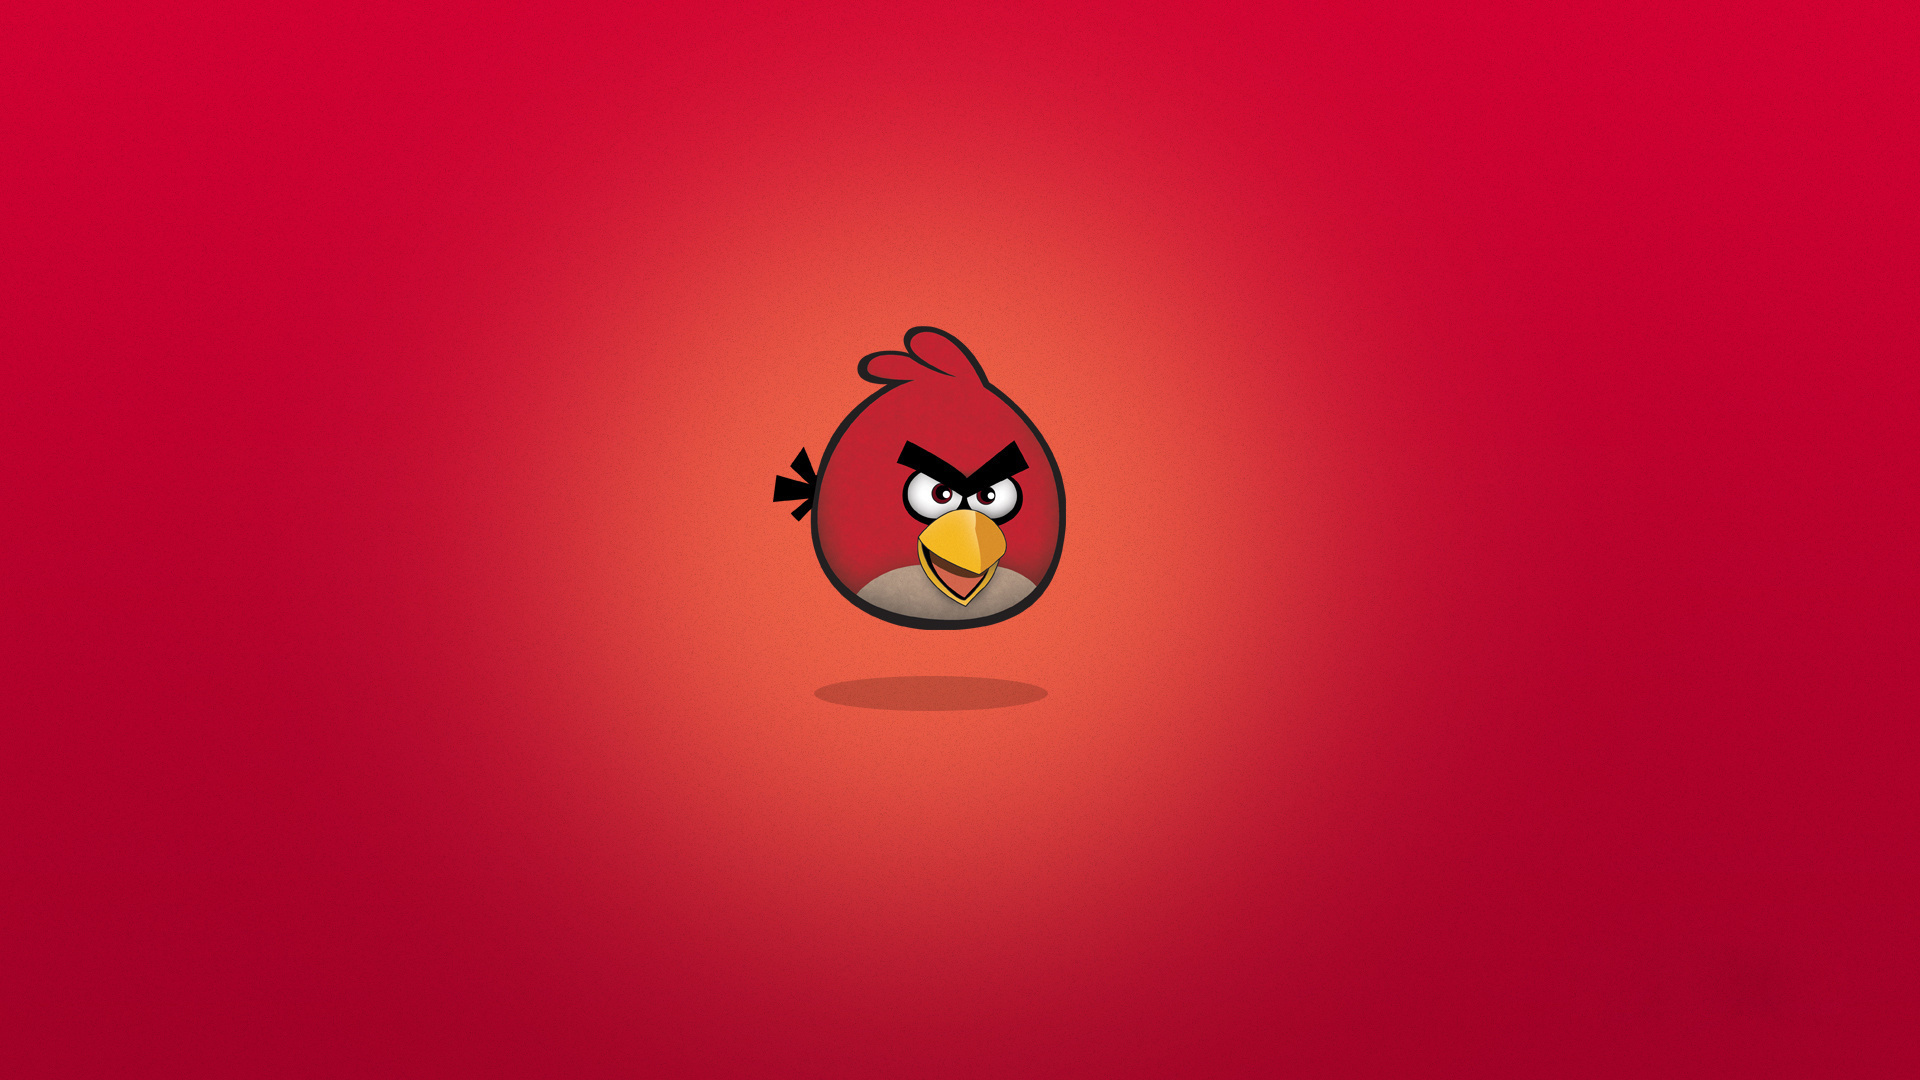 games, background, angry birds, red